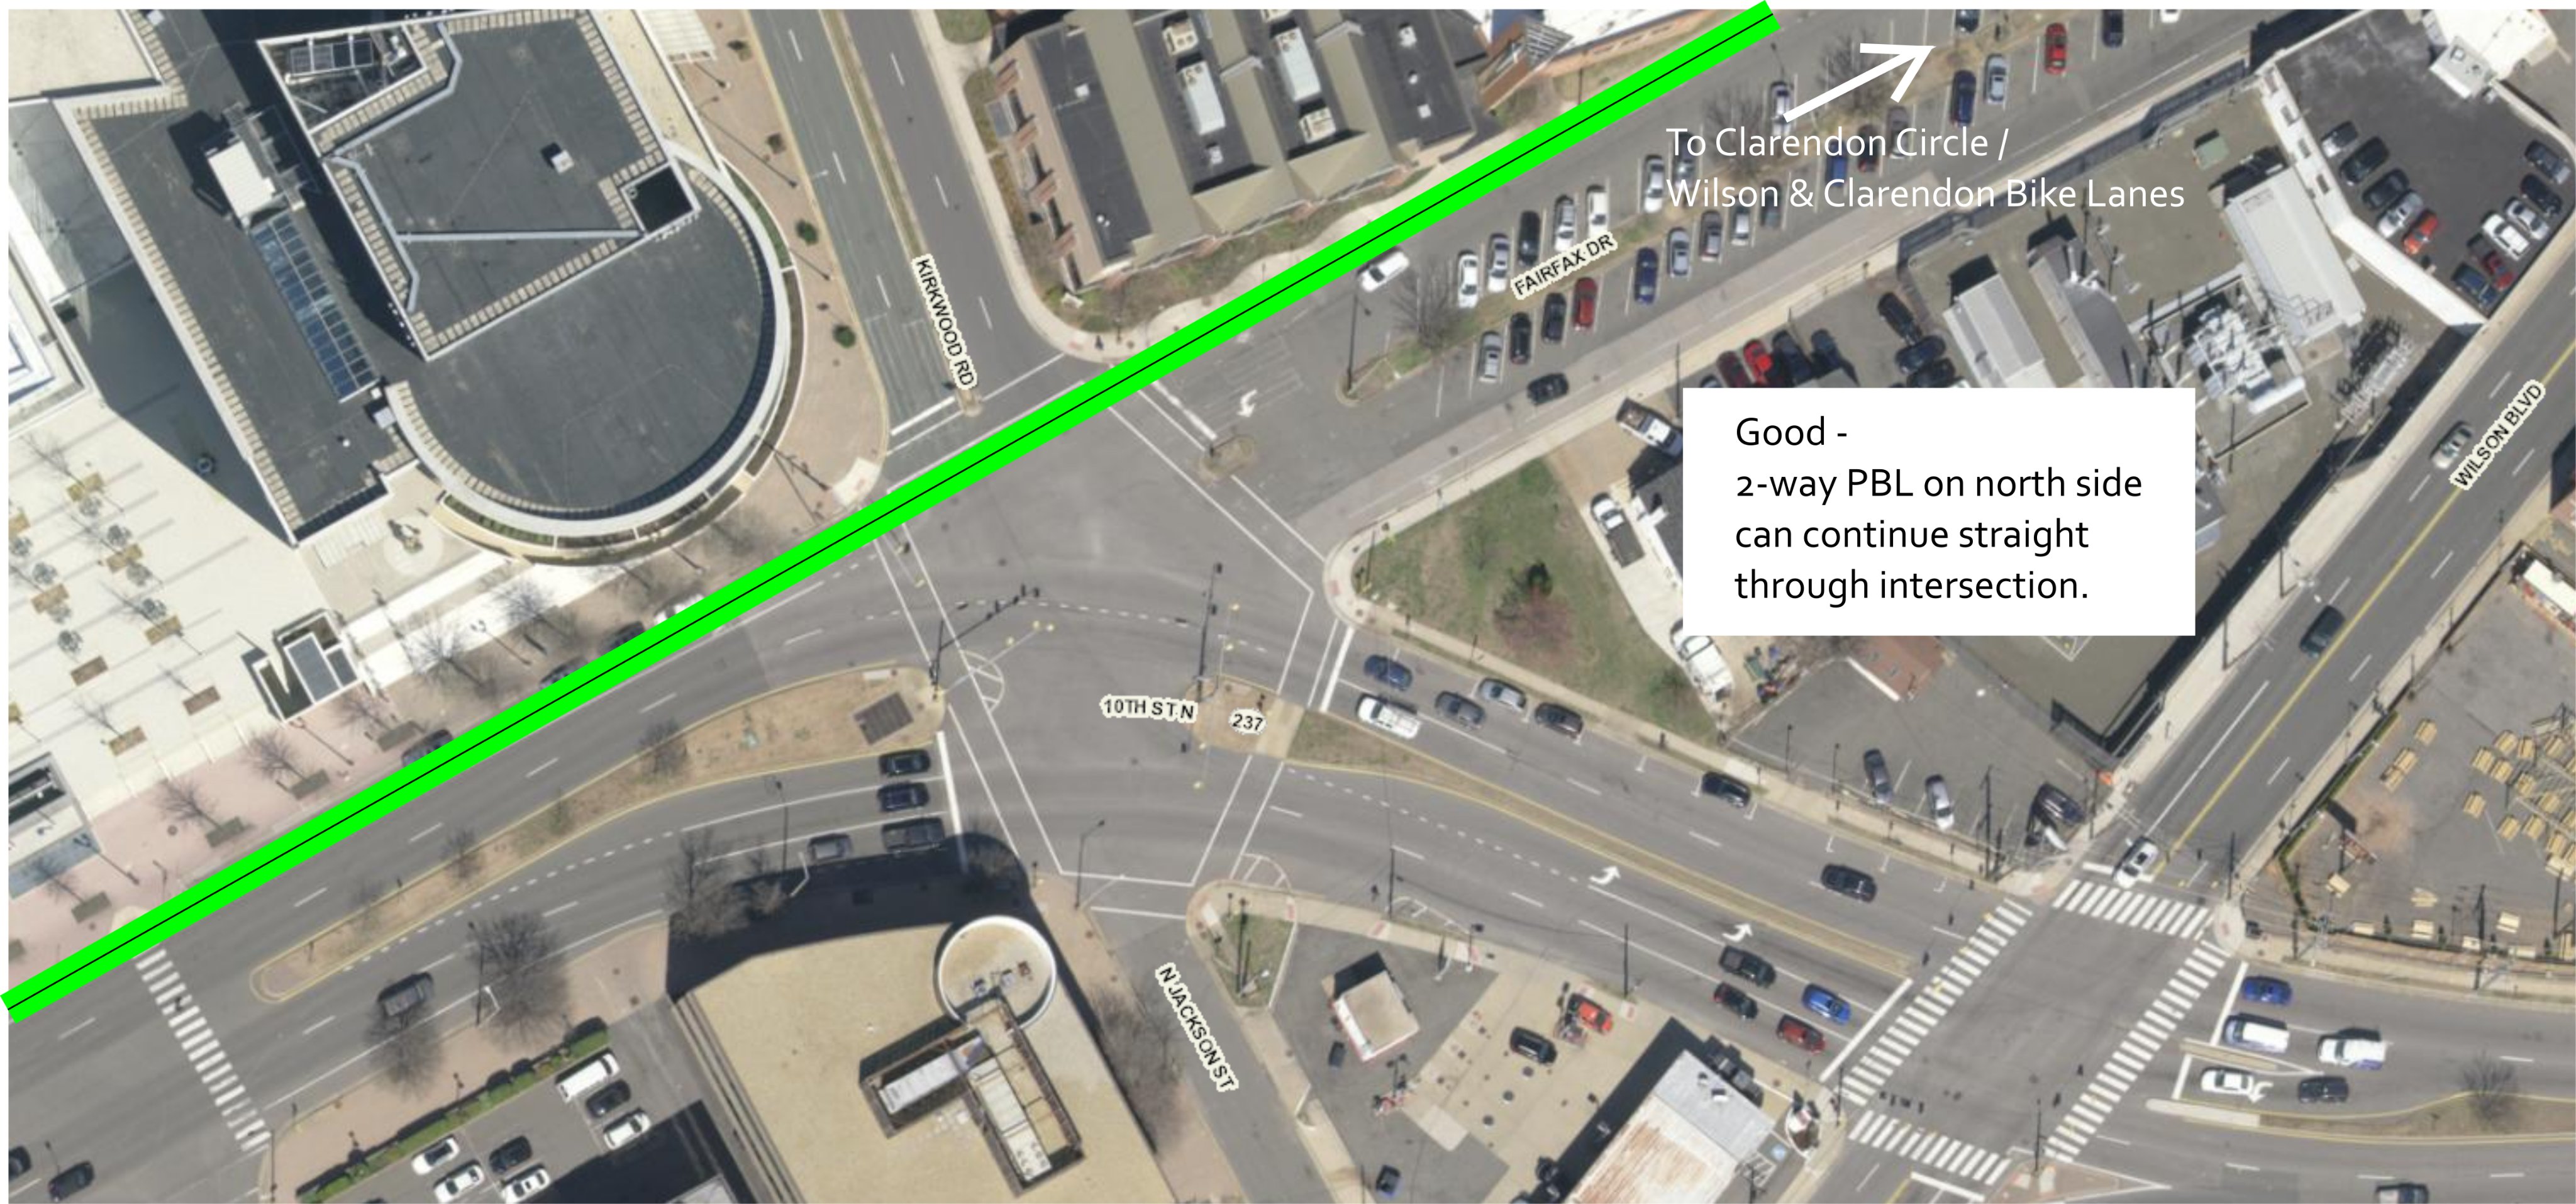 Good: a 2-way protected bike lane on the borth side can continue straight through the intersection.